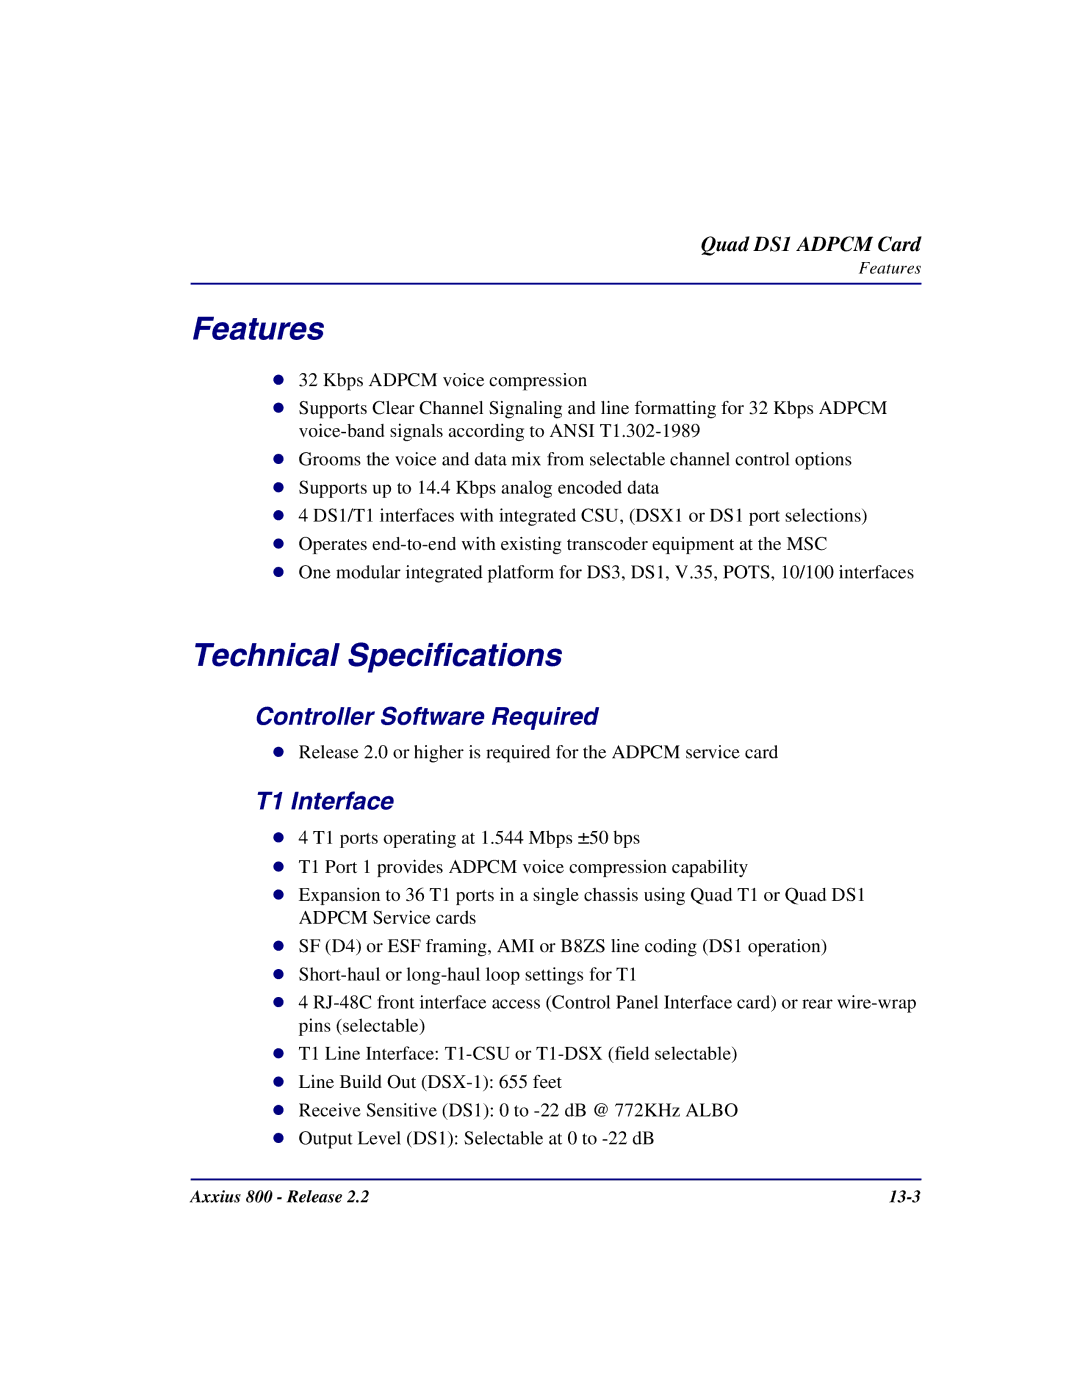 Carrier Access Axxius 800 user manual Features, T1 Interface 